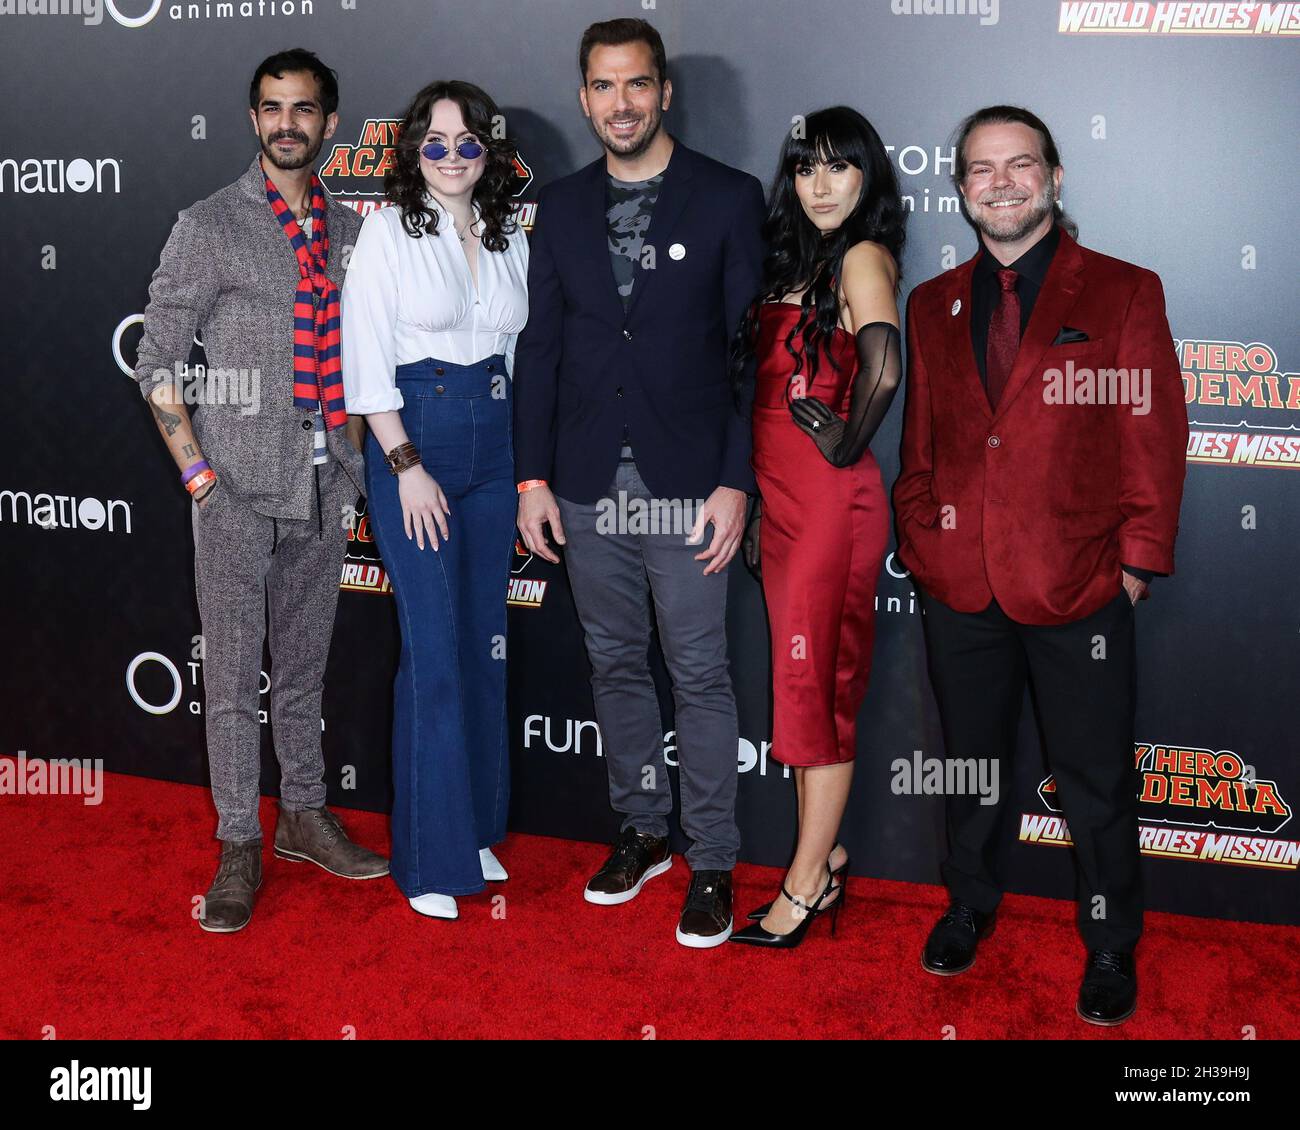 Los Angeles, United States. 26th Oct, 2021. LOS ANGELES, CALIFORNIA, USA - OCTOBER 26: Ryan Colt Levy, Sarah Roach, David Matranga, Cristina Vee and Justin Cook arrive at the Los Angeles Premiere Of Funimation's 'My Hero Academia: World Heroes' Mission' held at the L.A. Live Event Deck Top Floor Of The West Lot on October 26, 2021 in Los Angeles, California, United States. (Photo by Xavier Collin/Image Press Agency) Credit: Image Press Agency/Alamy Live News Stock Photo